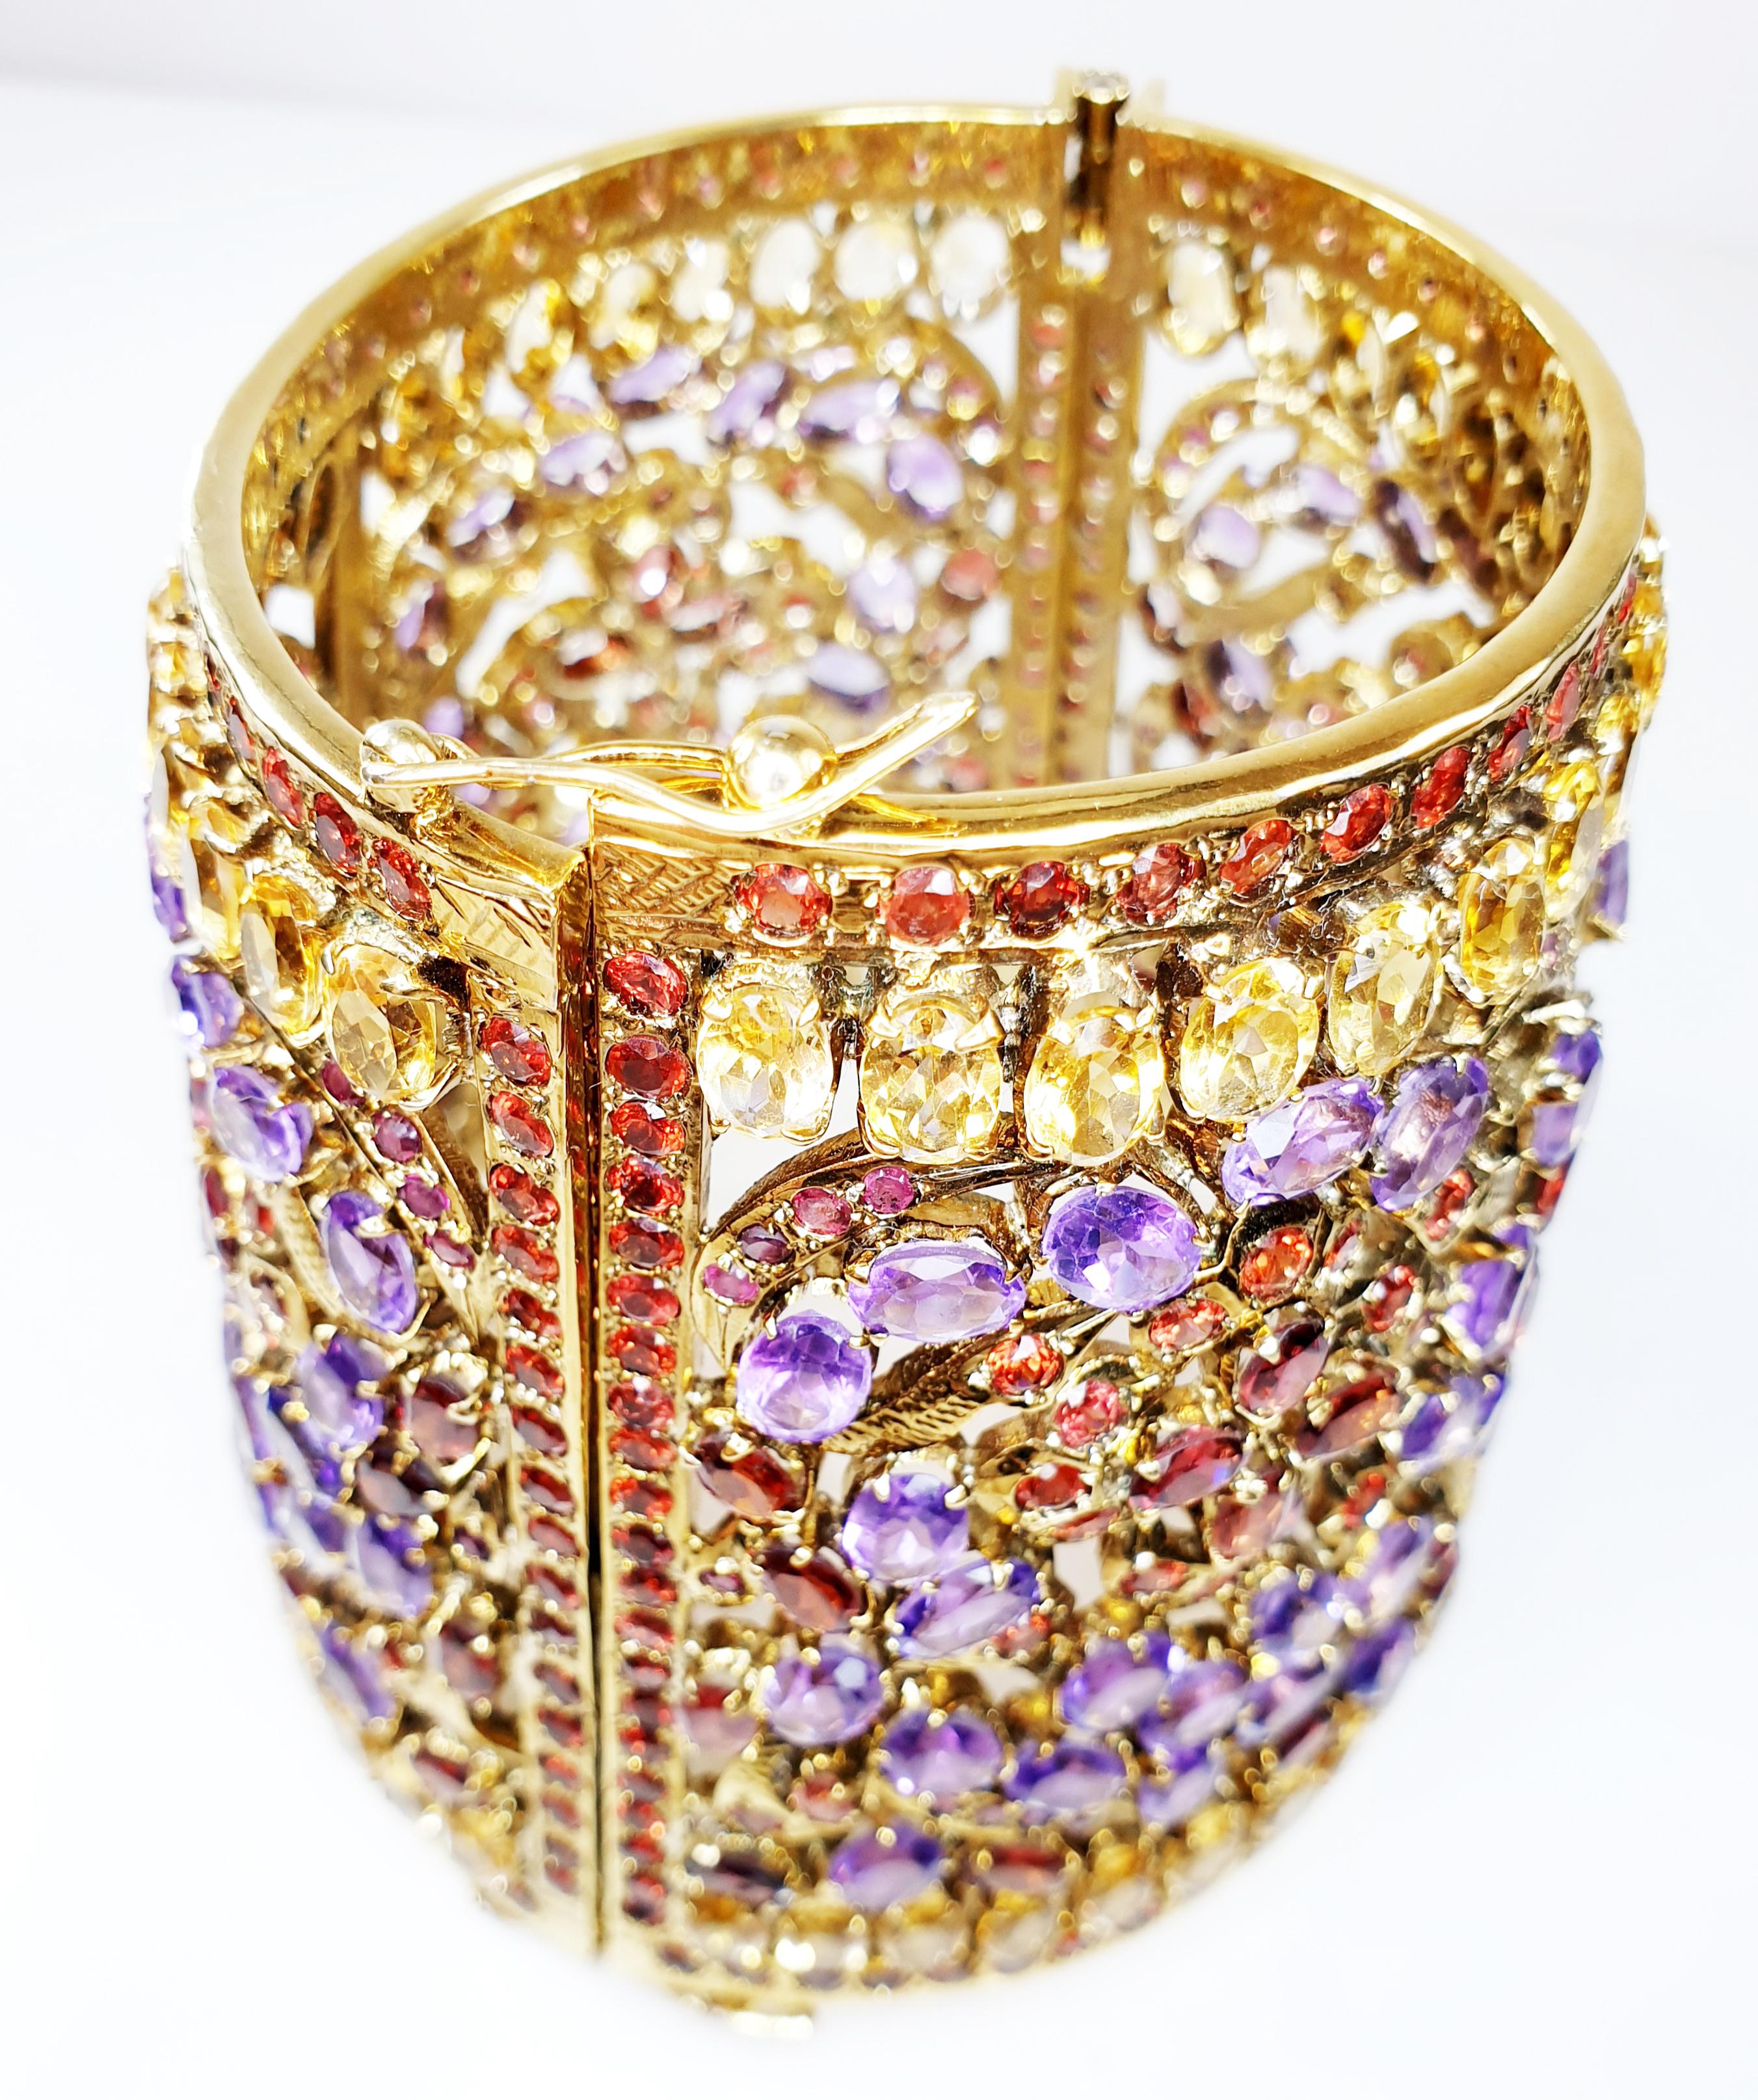 Brilliant Cut Gold-Plated Indian Cuff Bracelet with Amethysts, Citrines and Granates